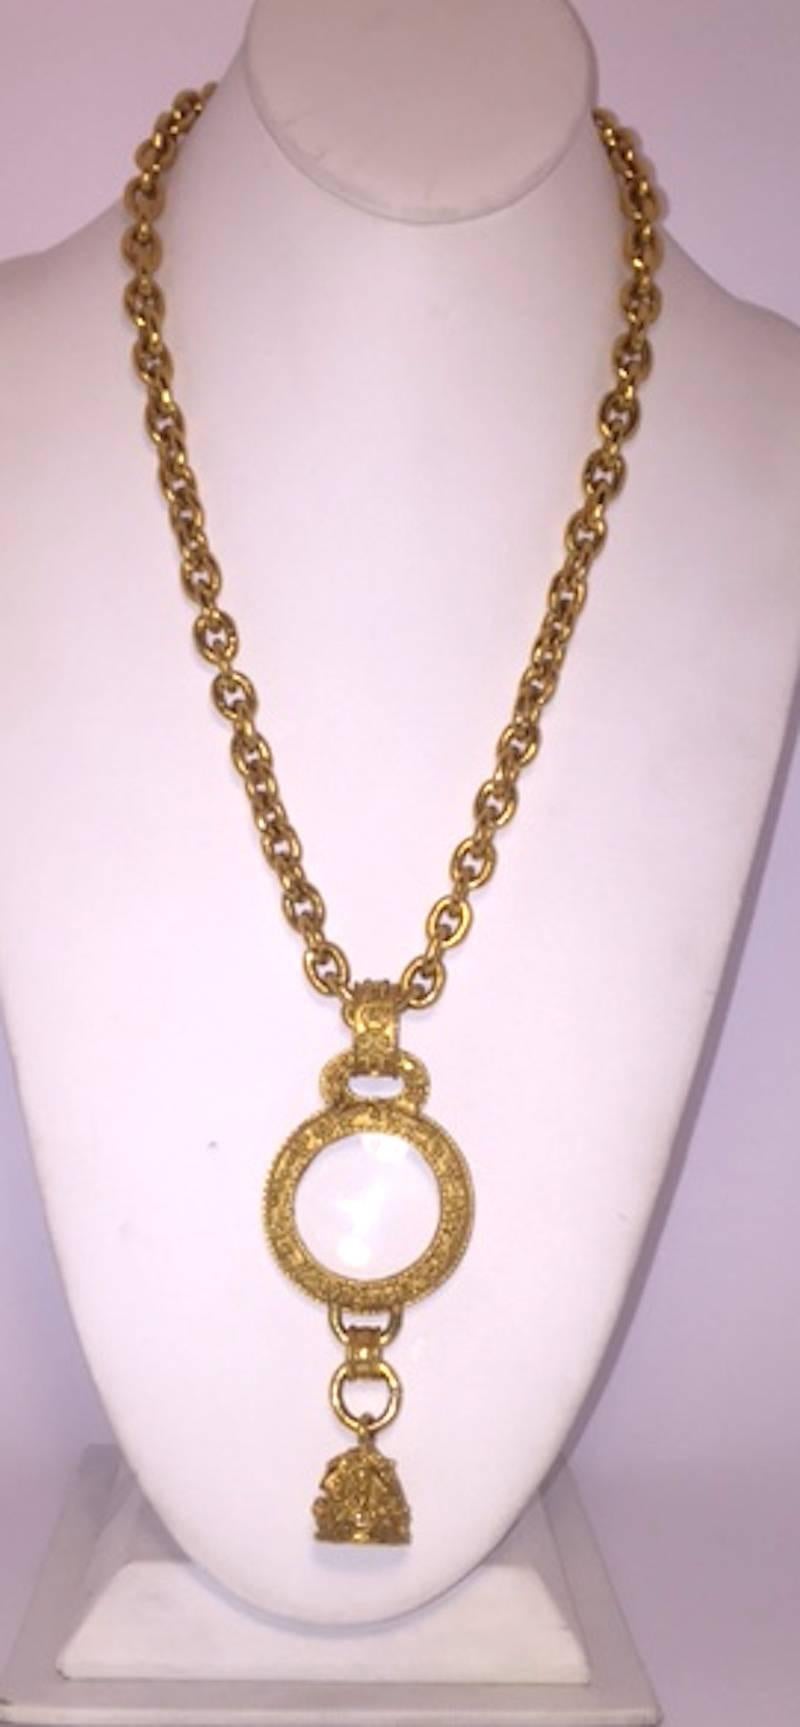 From the Chanel Autumn 1994 collection. Heavy chain with clasp length is 35.5 inches (90 cm.) long. Magnifying glass pendant with bell charm. From top of bail to bottom of bell the pendant measures 4.25 inches (12 cm.) long and 1.75 inches (4.5 cm.)